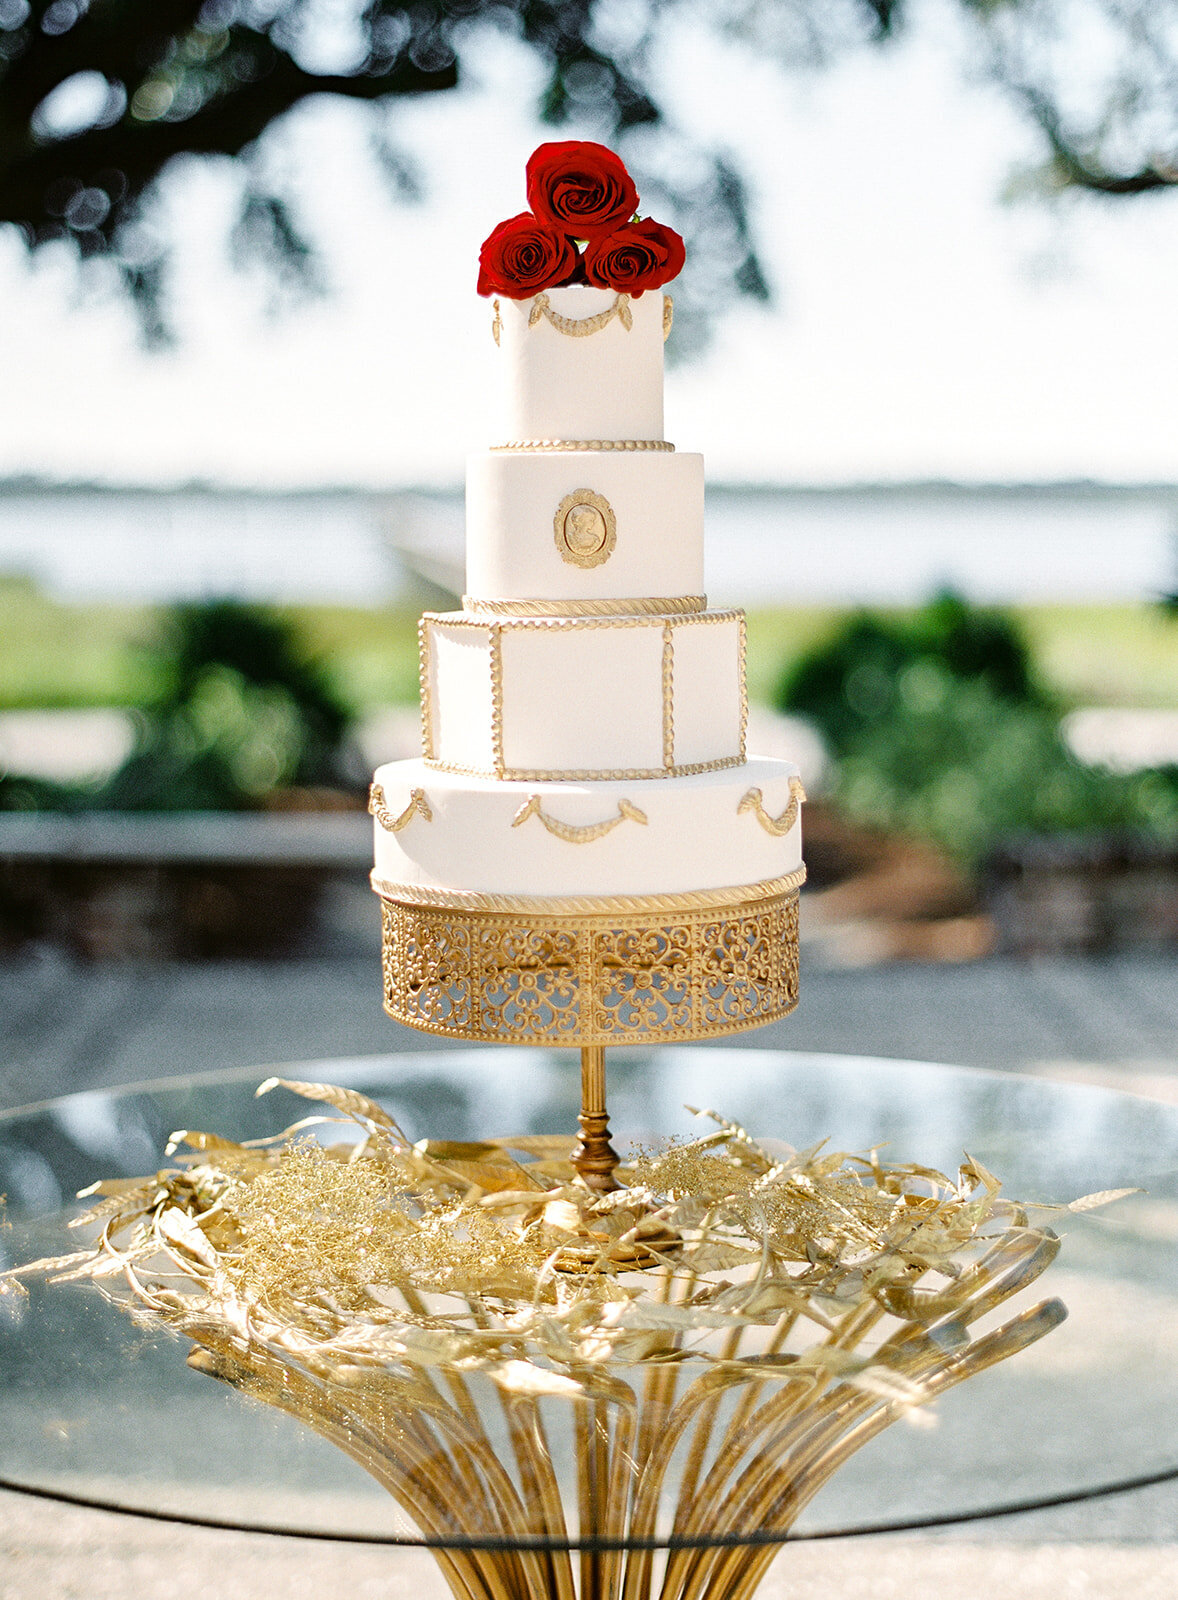 Ivory and gold four tier wedding cake on gold pedestal with painted gold myrtle leaves around the glass top of the table with gold table legs. Photographed at Lowndes Grove wedding reception by wedding photographers in Charleston Amy Mulder Photography.